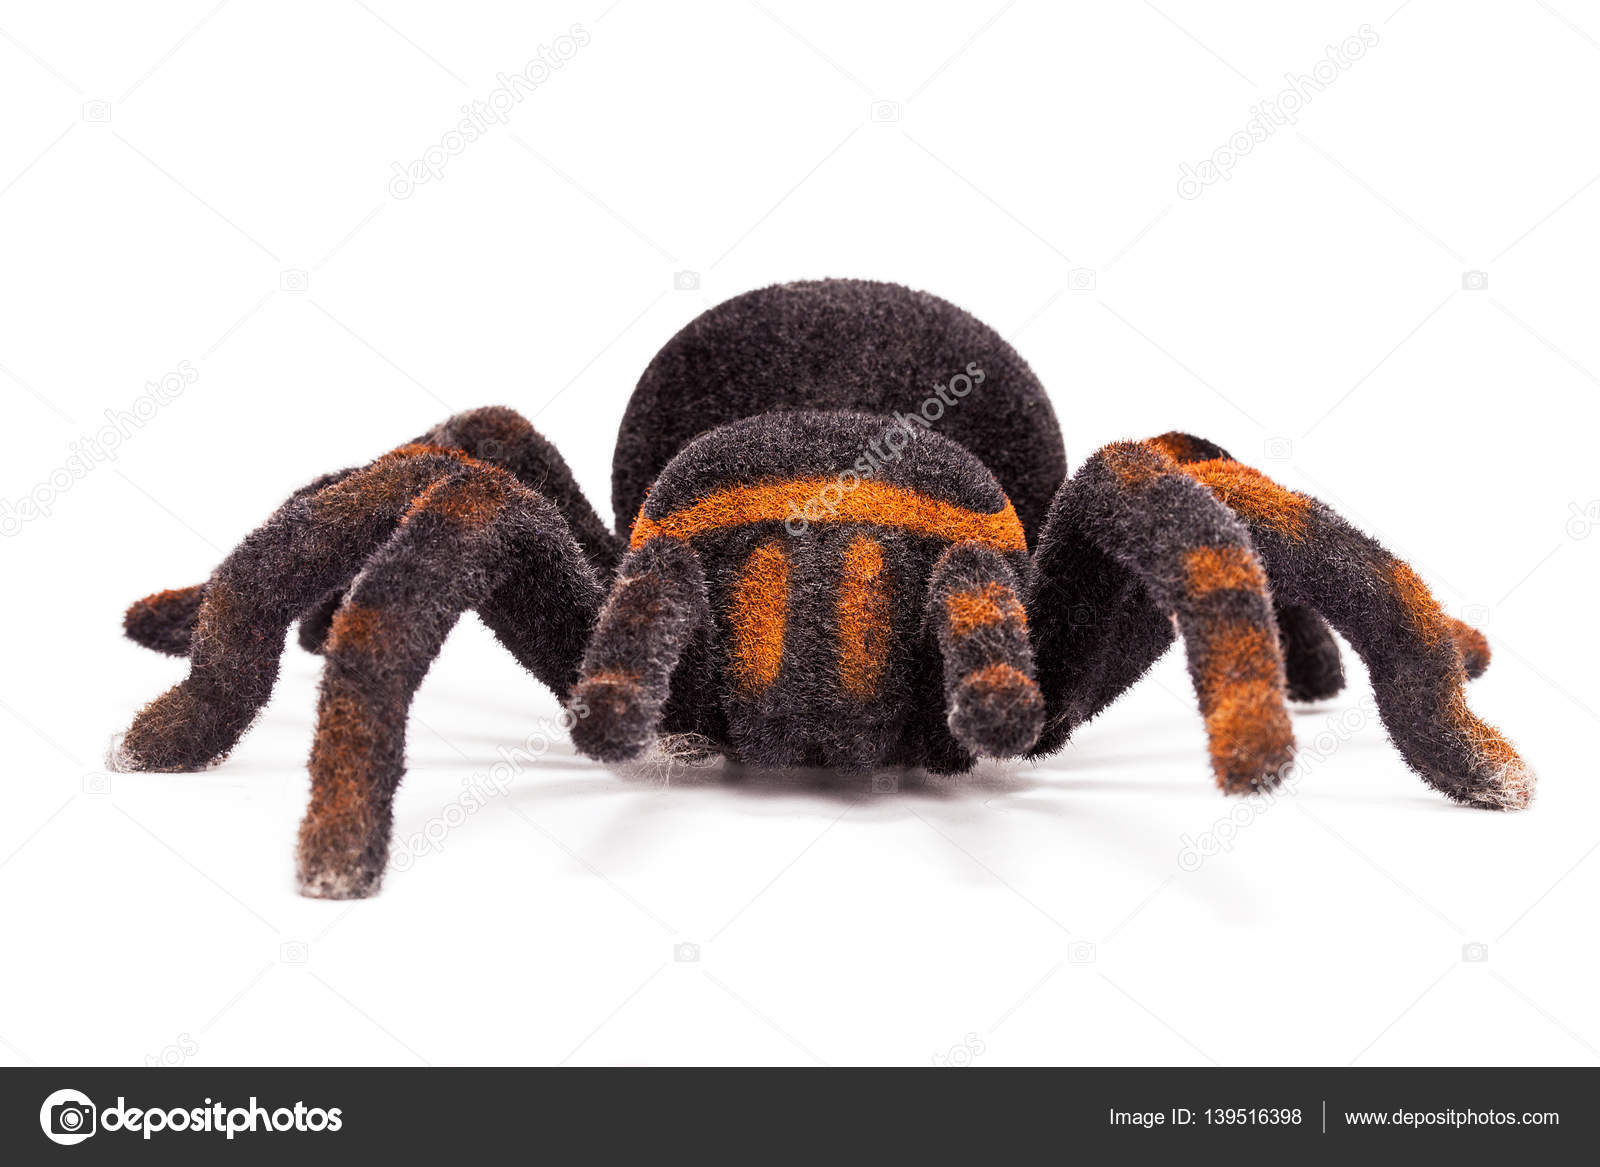 Spider stuffed animal isolated on white, front view Stock Photo by  ©patronestaff 139516398